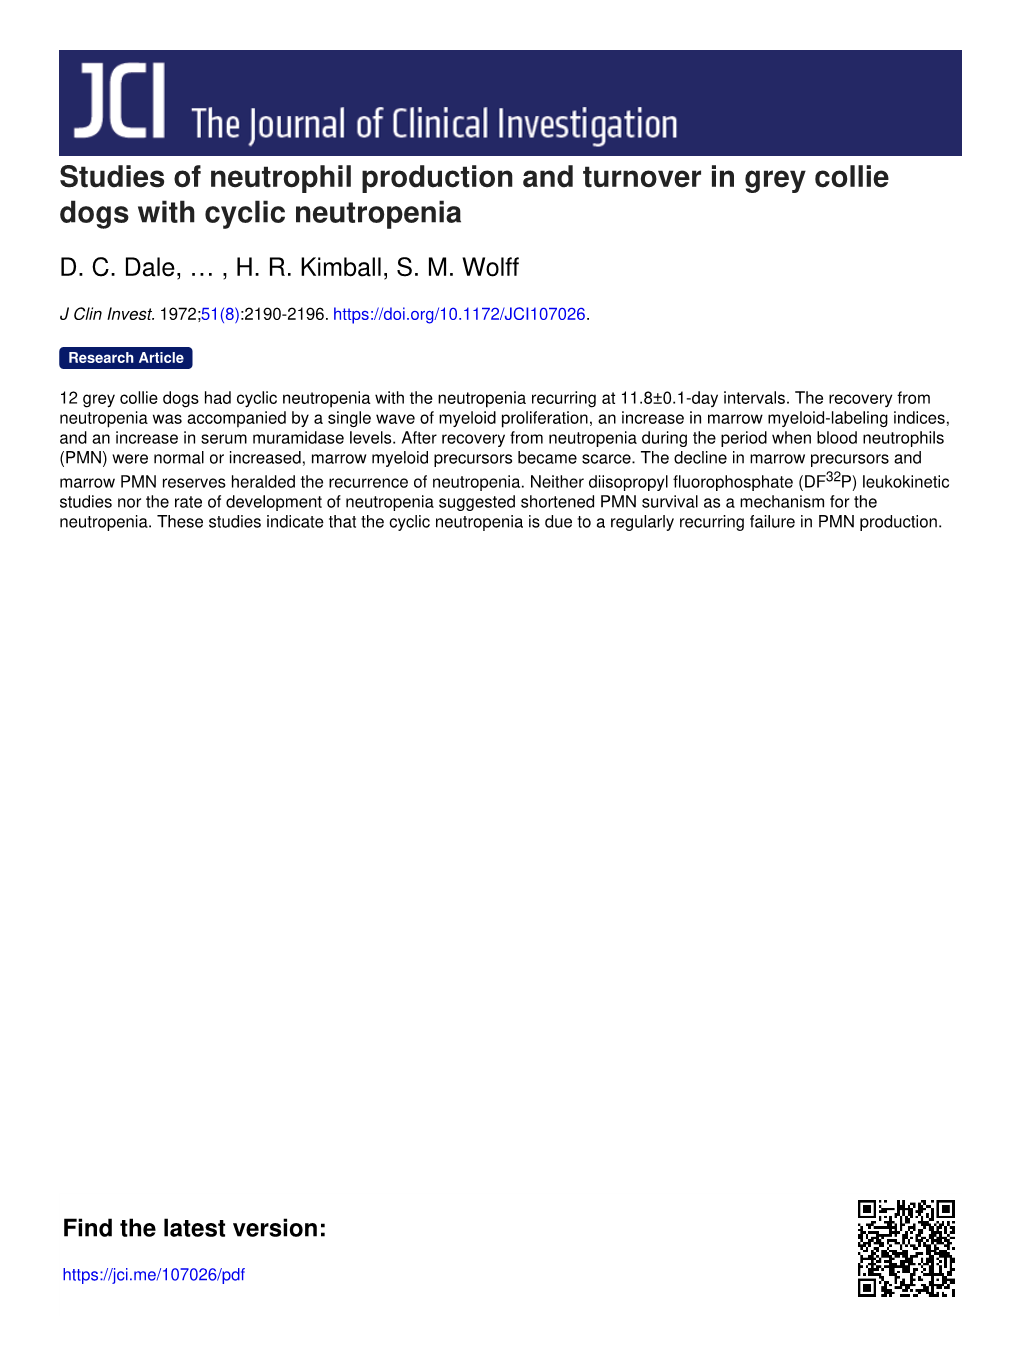 Studies of Neutrophil Production and Turnover in Grey Collie Dogs with Cyclic Neutropenia